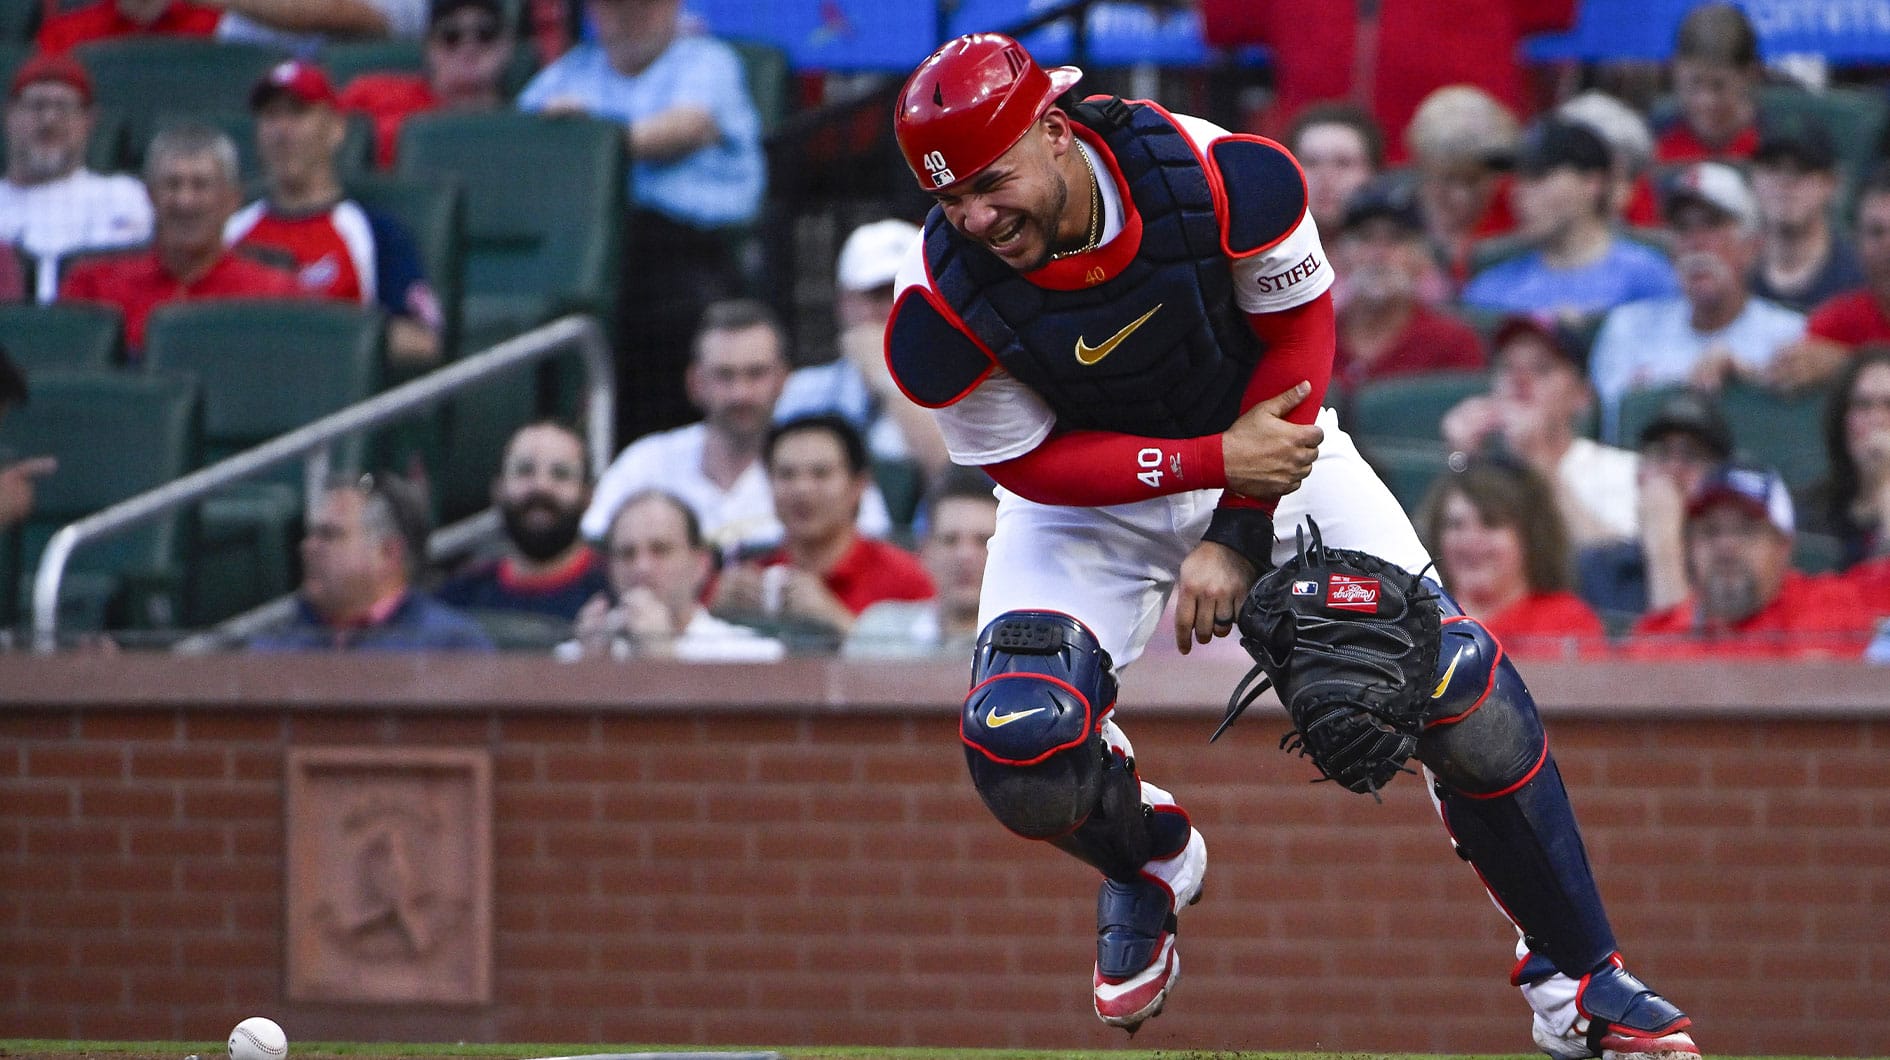 St. Louis Cardinals catcher Willson Contreras (40) reacts after fracturing his left arm during the second inning against the New York Mets at Busch Stadium